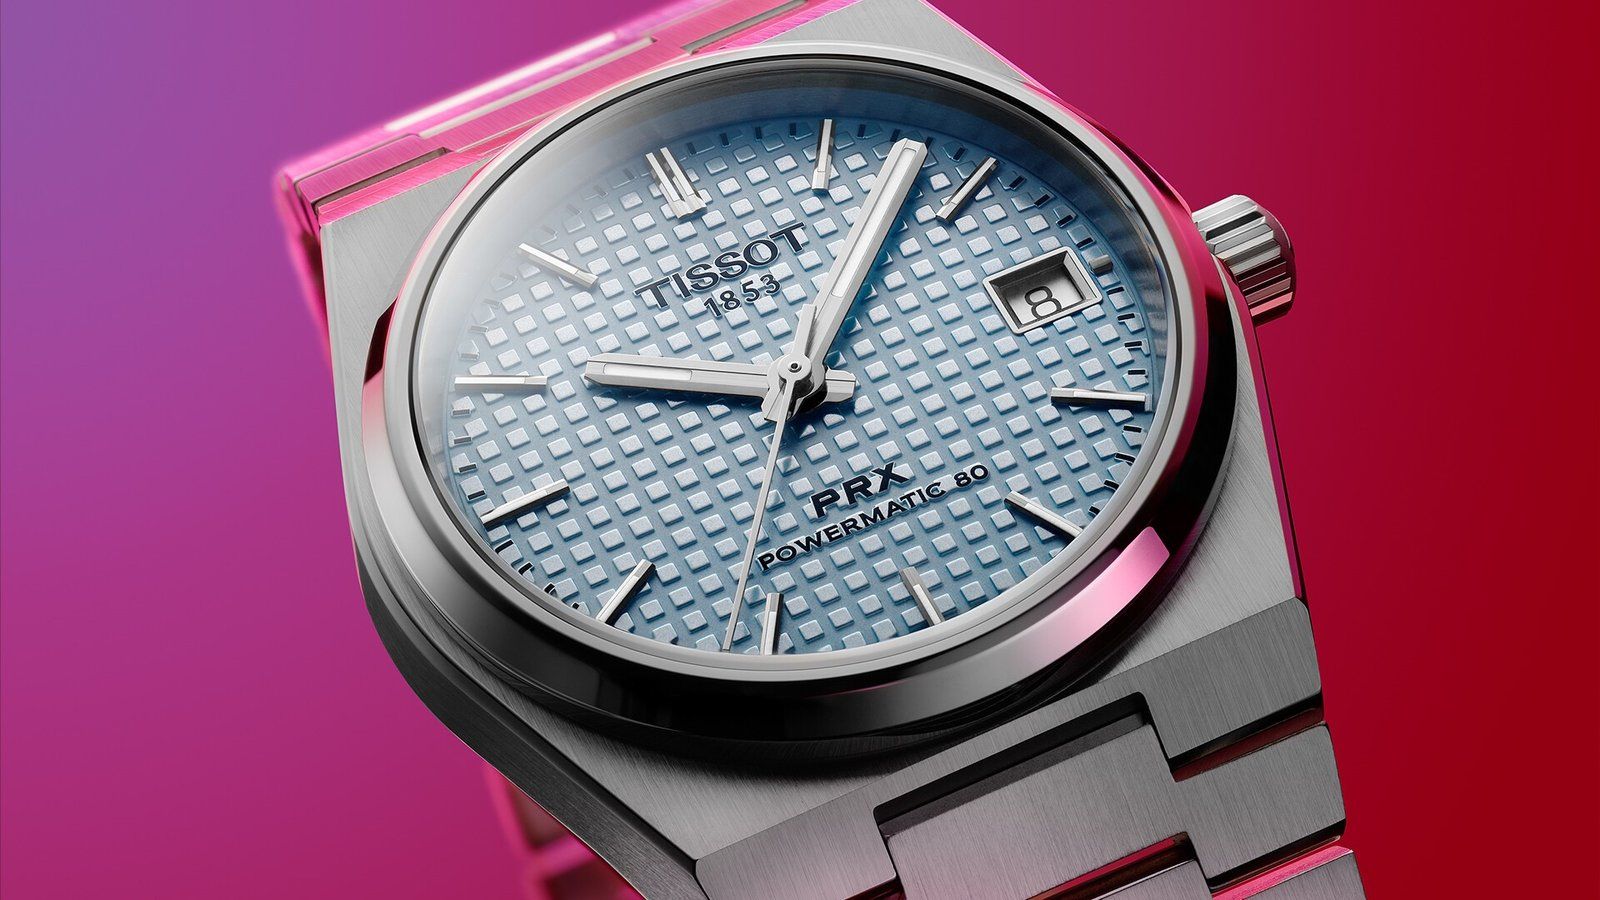 Stainless steel timepiece with a waffle-designed dial